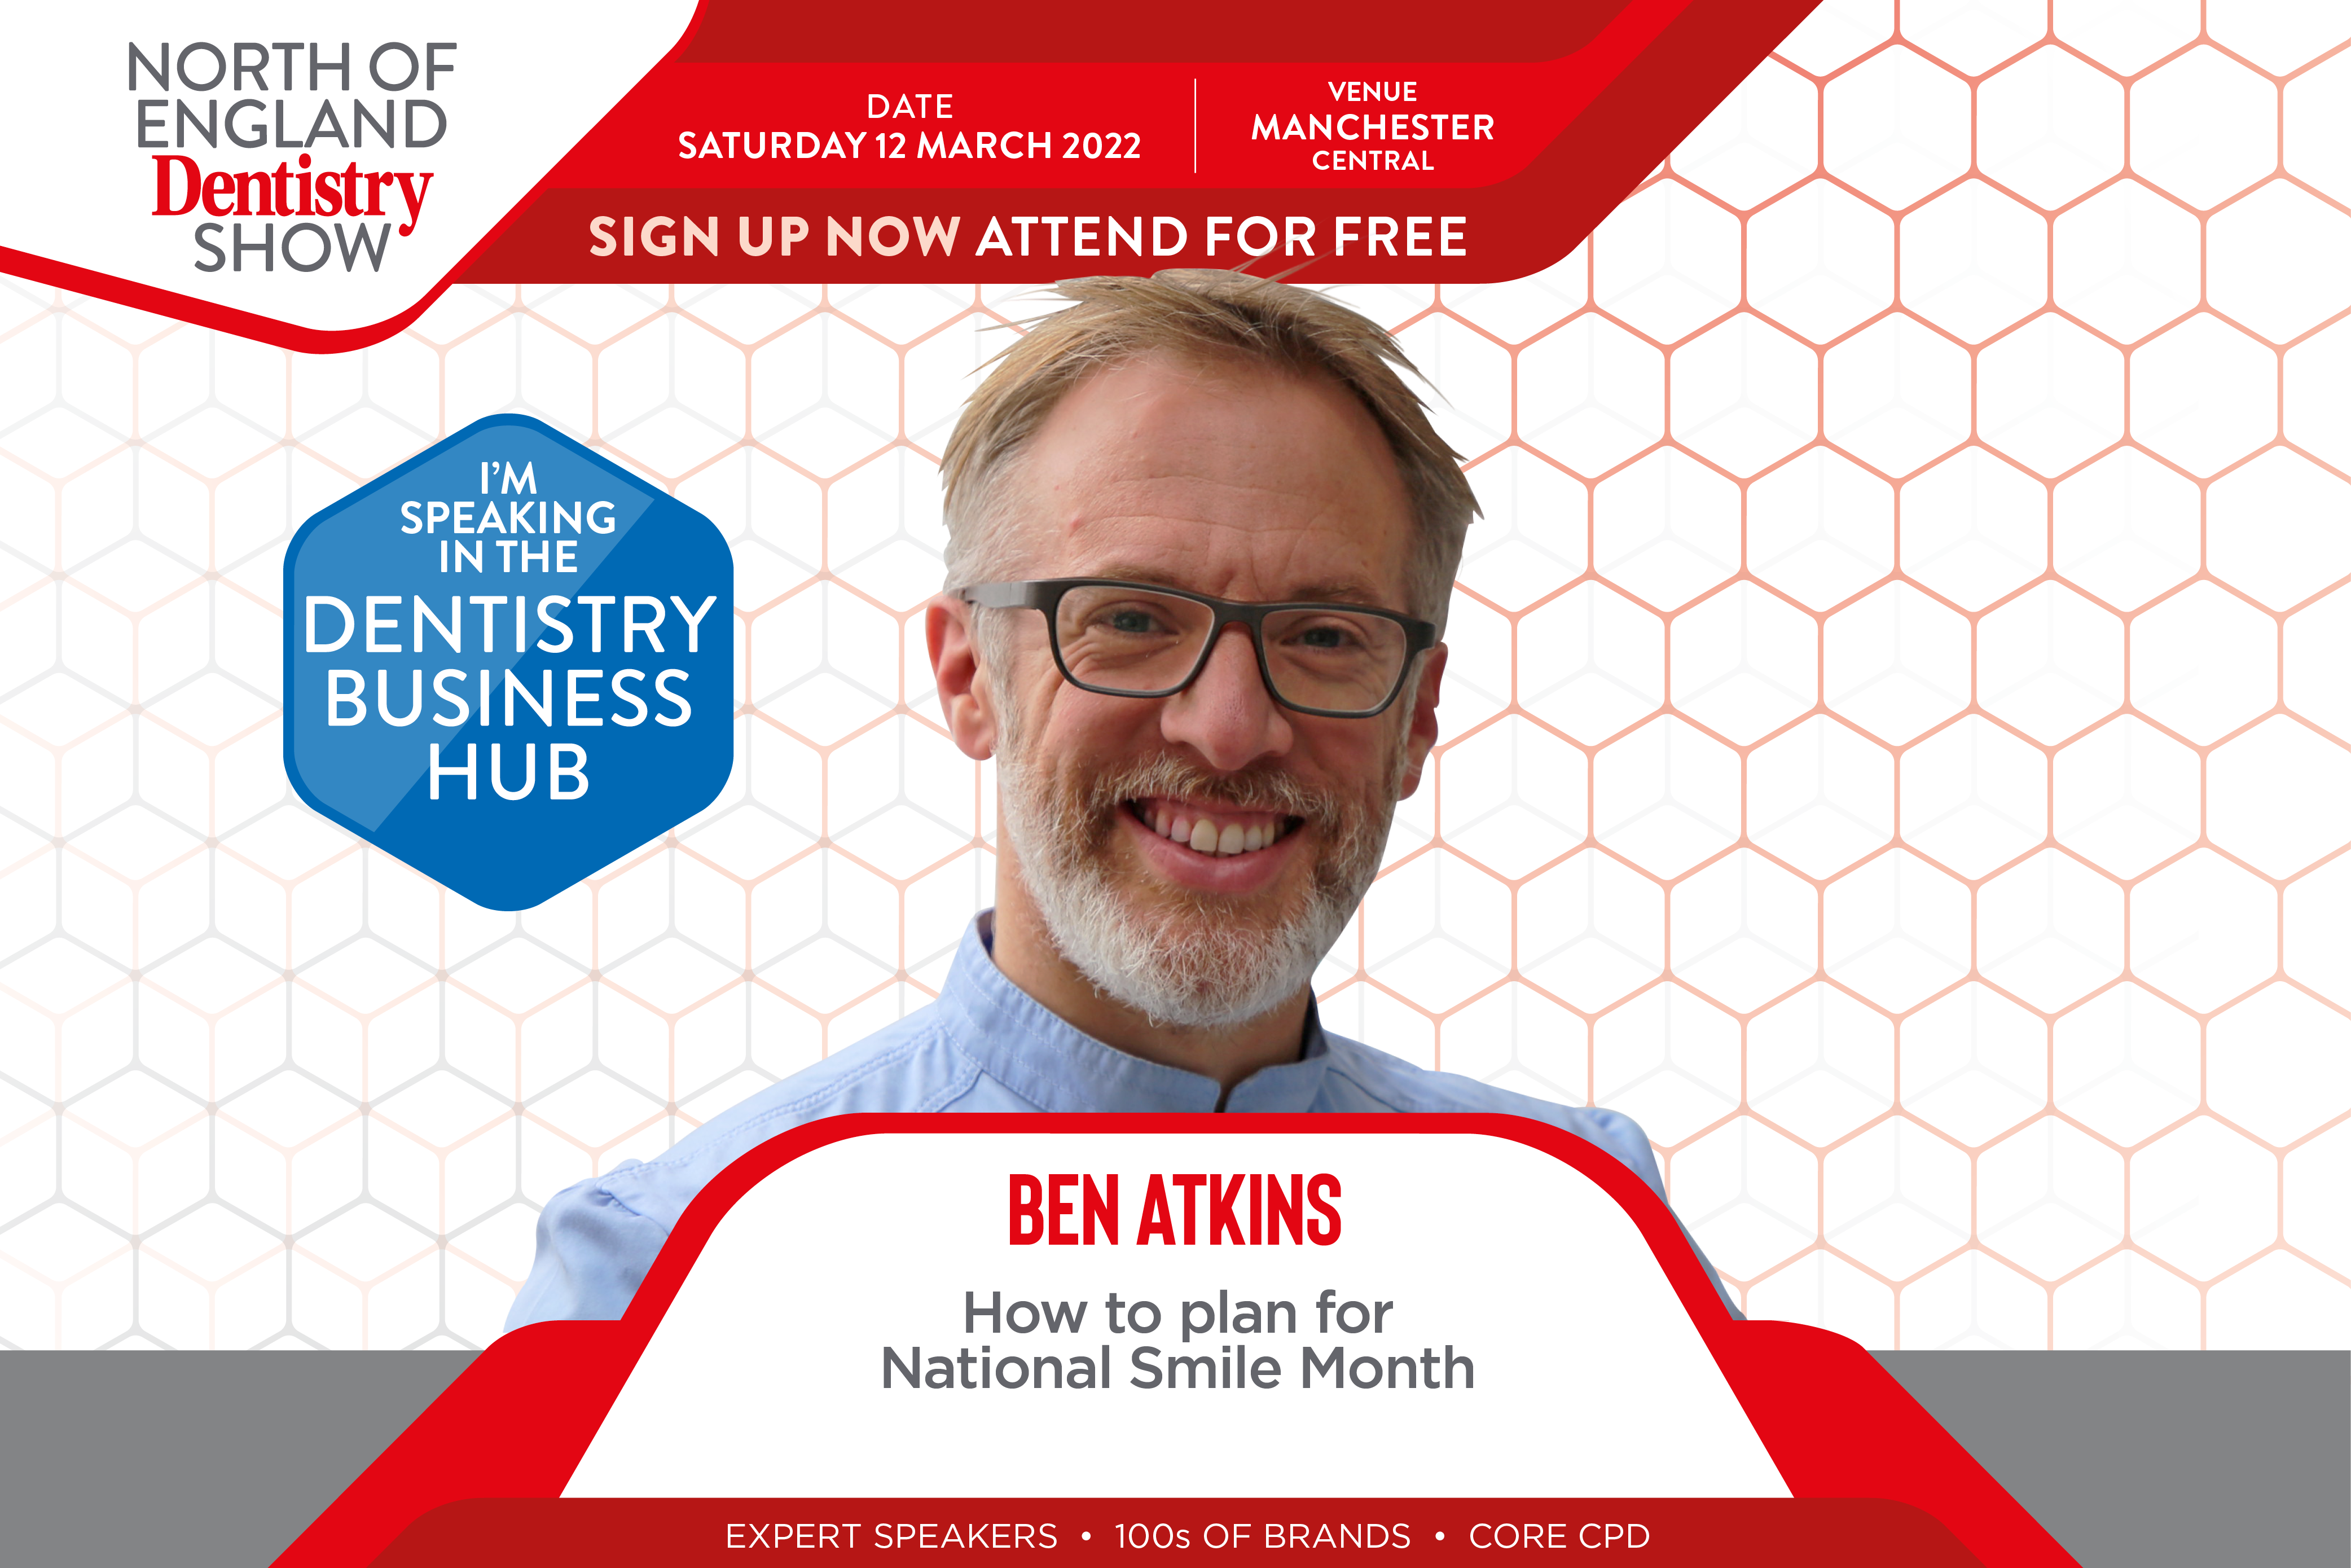 North of England Dentistry Show – Ben Atkins on National Smile Month